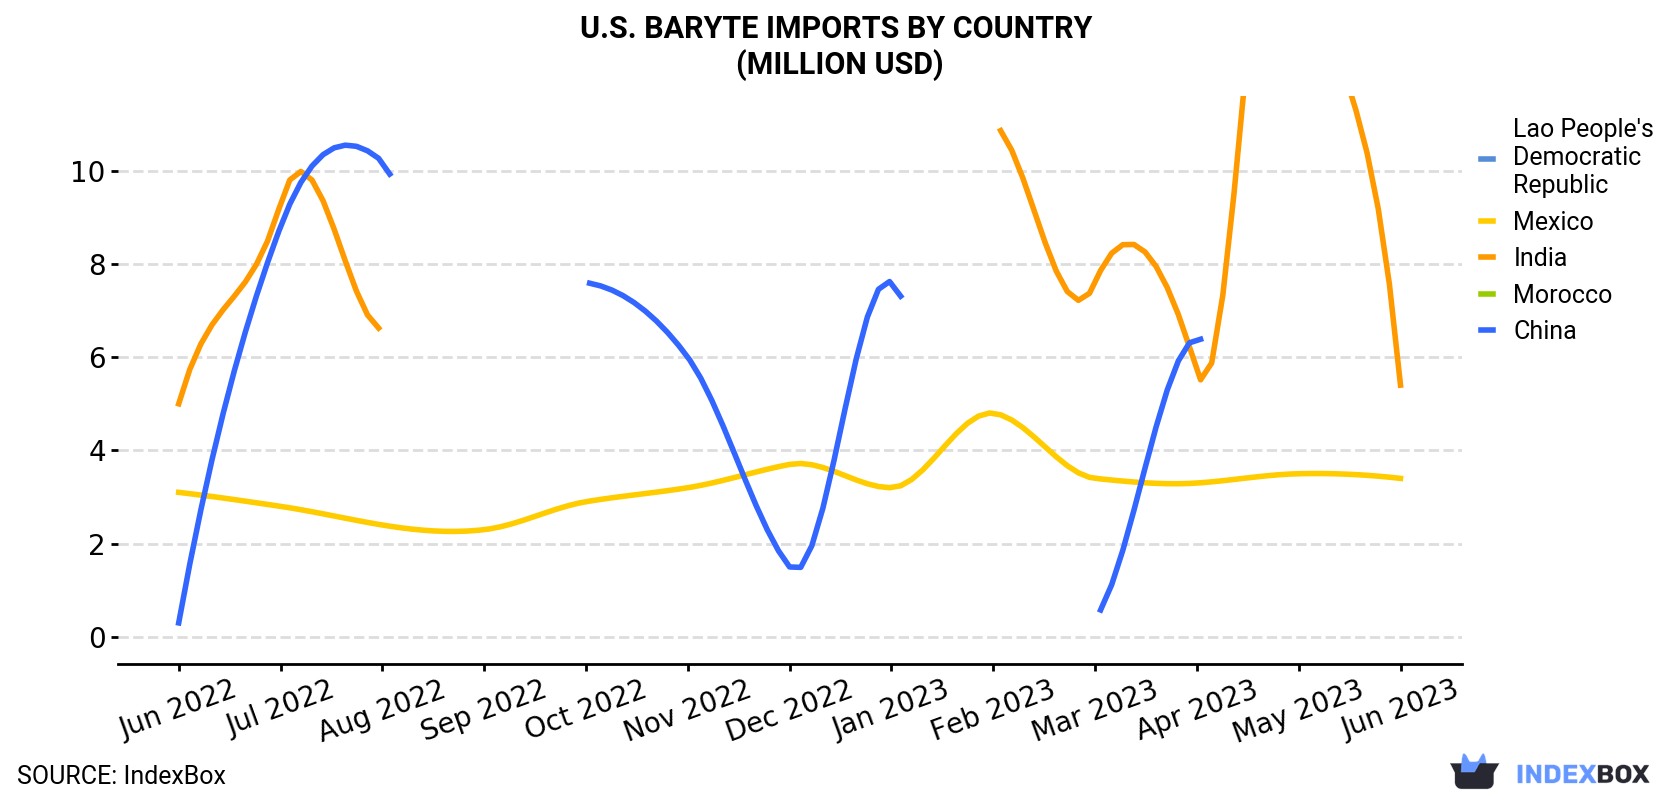 U.S. Baryte Imports By Country (Million USD)